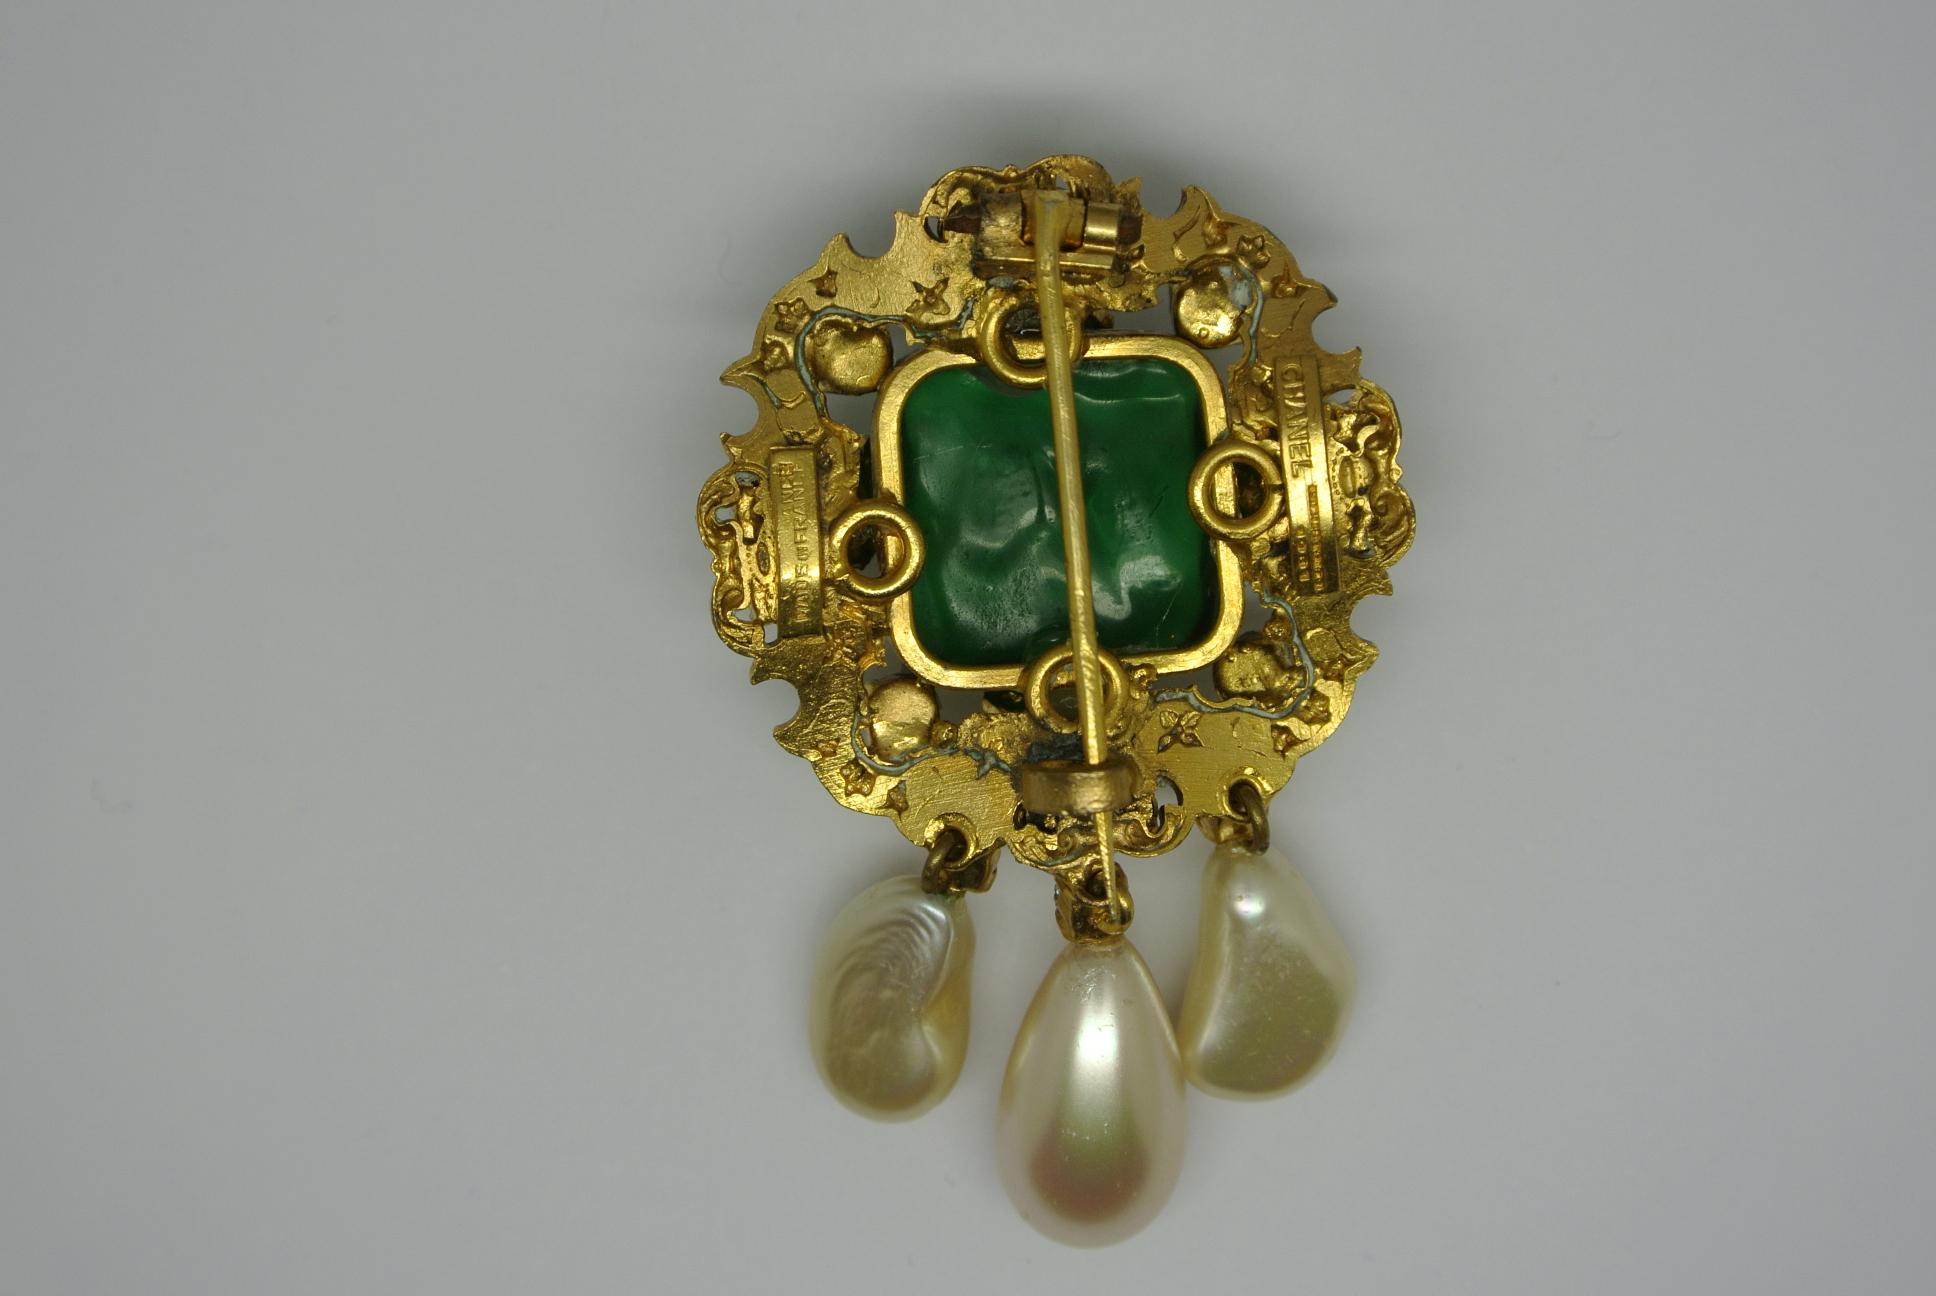 Most classic Chanel brooch, signature shows dated 1960s. Has been worn by Coco Chanel herself. It is in good condition. Designed by Robert Goossens, with poured glass.